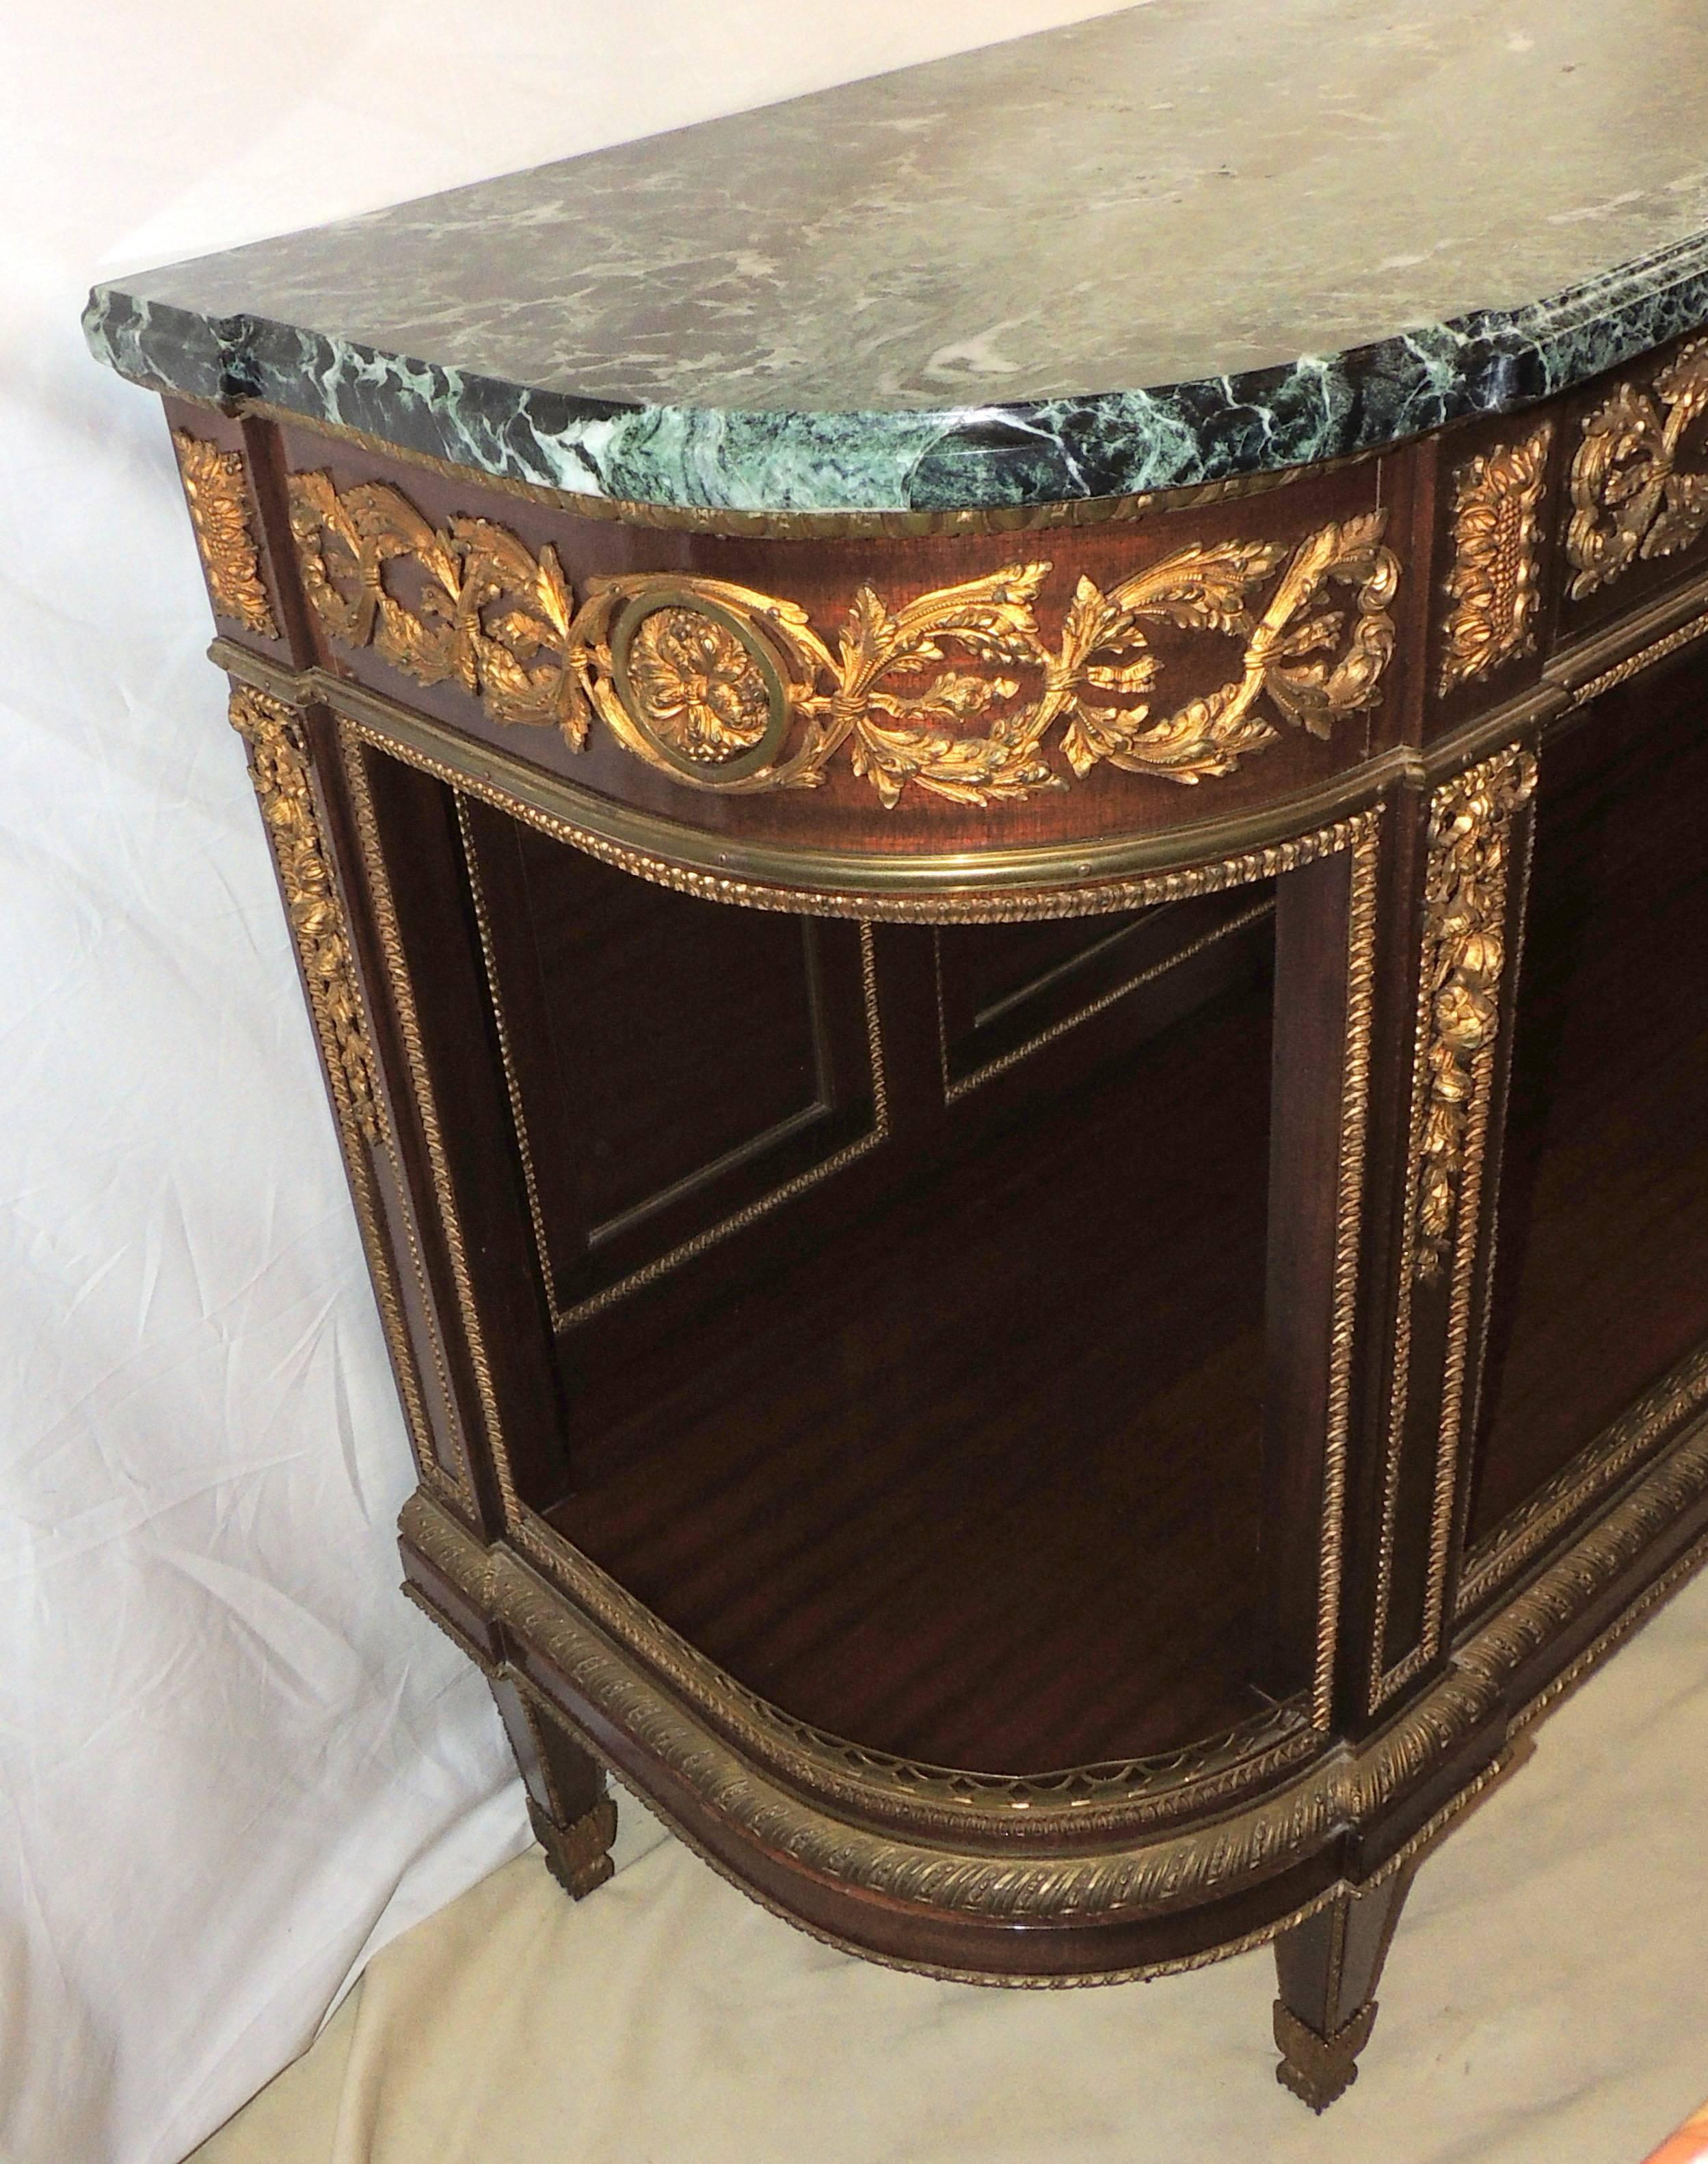 Gilt Fine French Ormolu Bronze-Mounted Marble-Top Dessert Demilune Console Sideboard